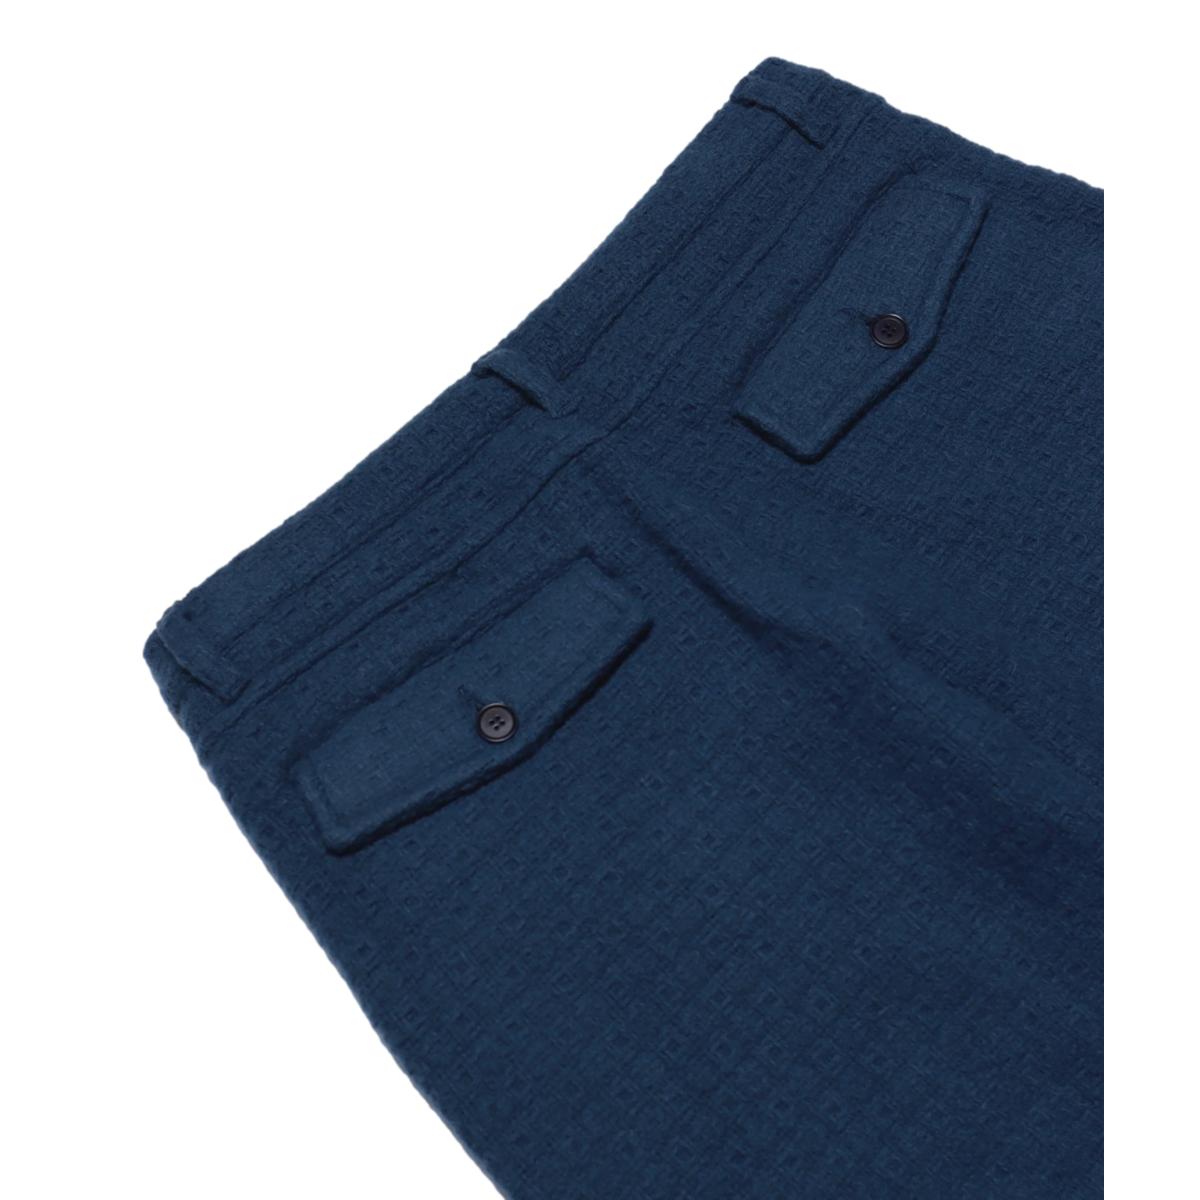 Ryder Trouser Insignia Blue Textured Jacquard - Pants